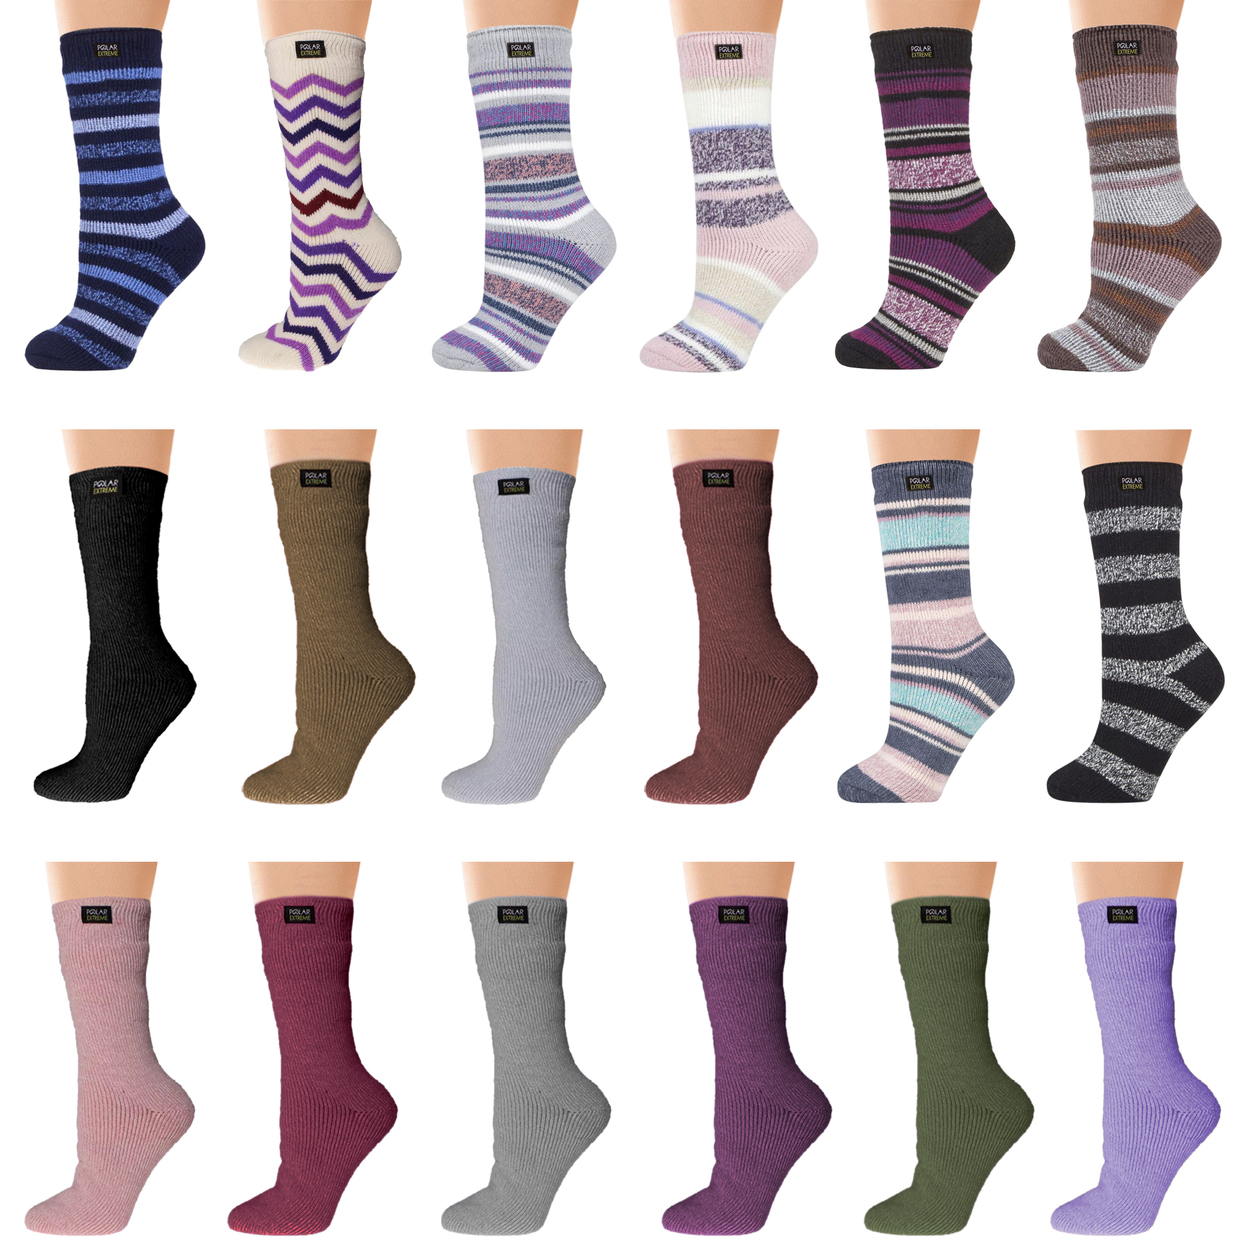 Multi-Pairs: Women's Polar Extreme Insulated Thermal Ultra-Soft Winter Warm Crew Socks - 4-pack